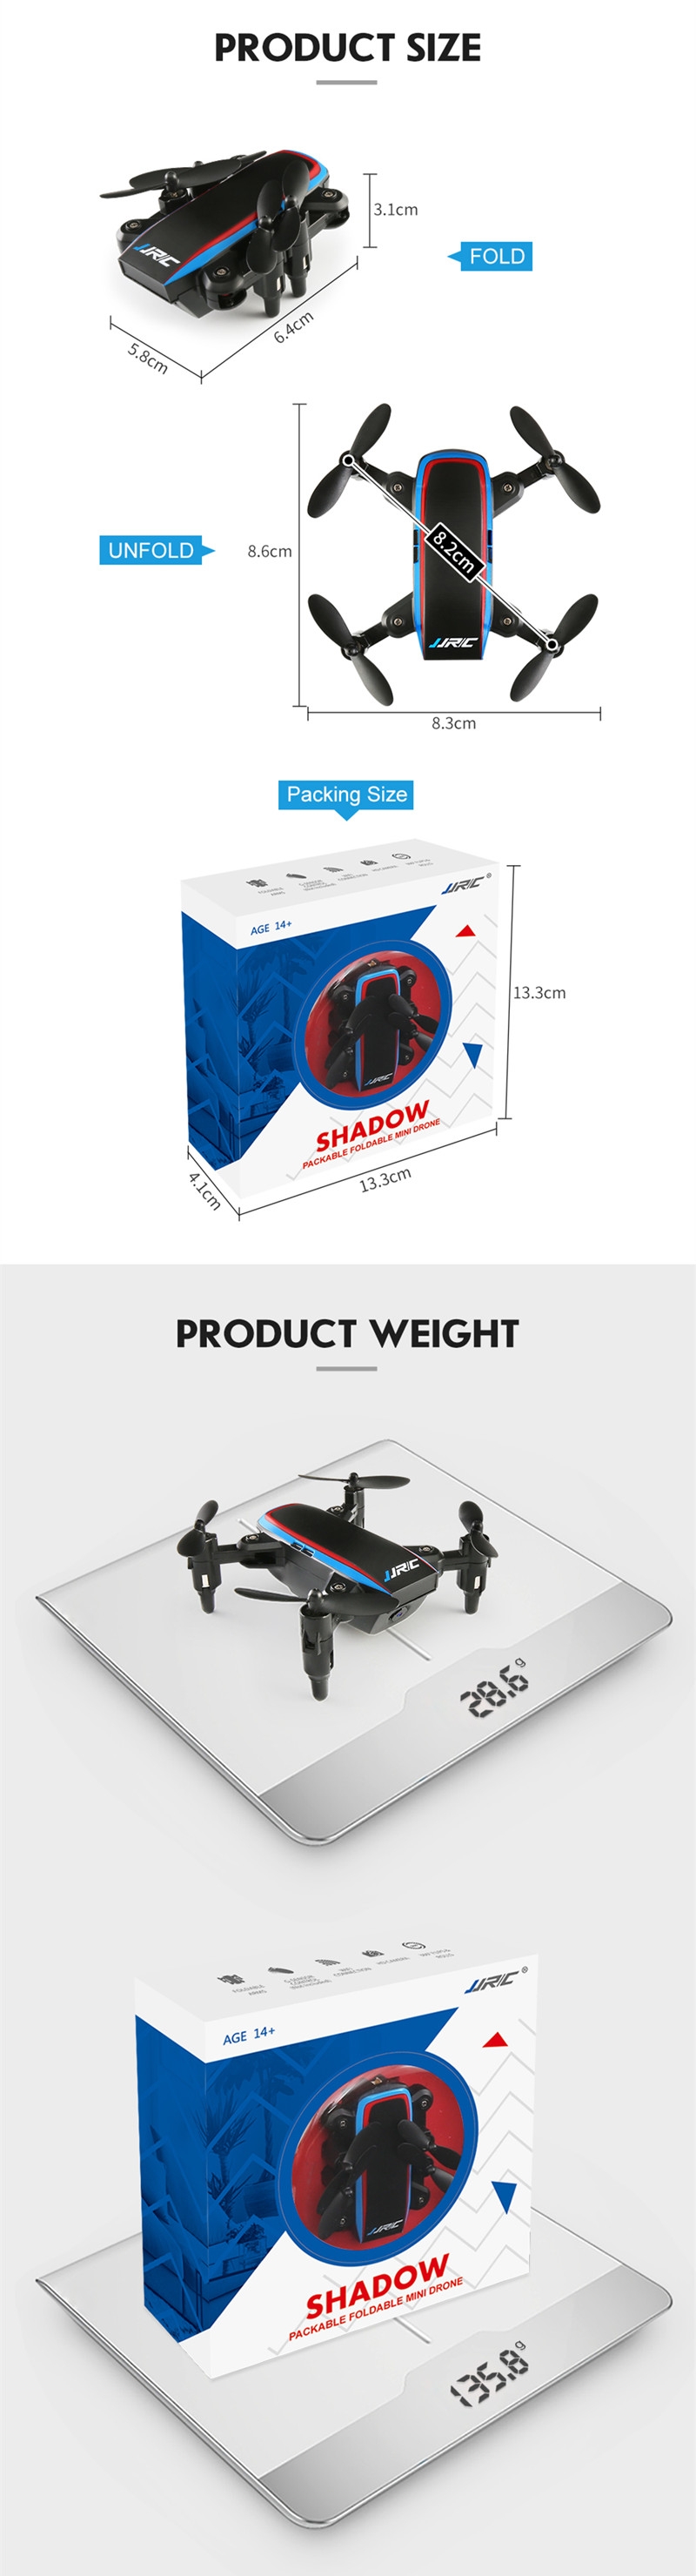 JJRC H53W Shadow WiFi FPV Foldable Mini Drone With 480P Camera Altitude Hold Mode RC Quadcopter BNF